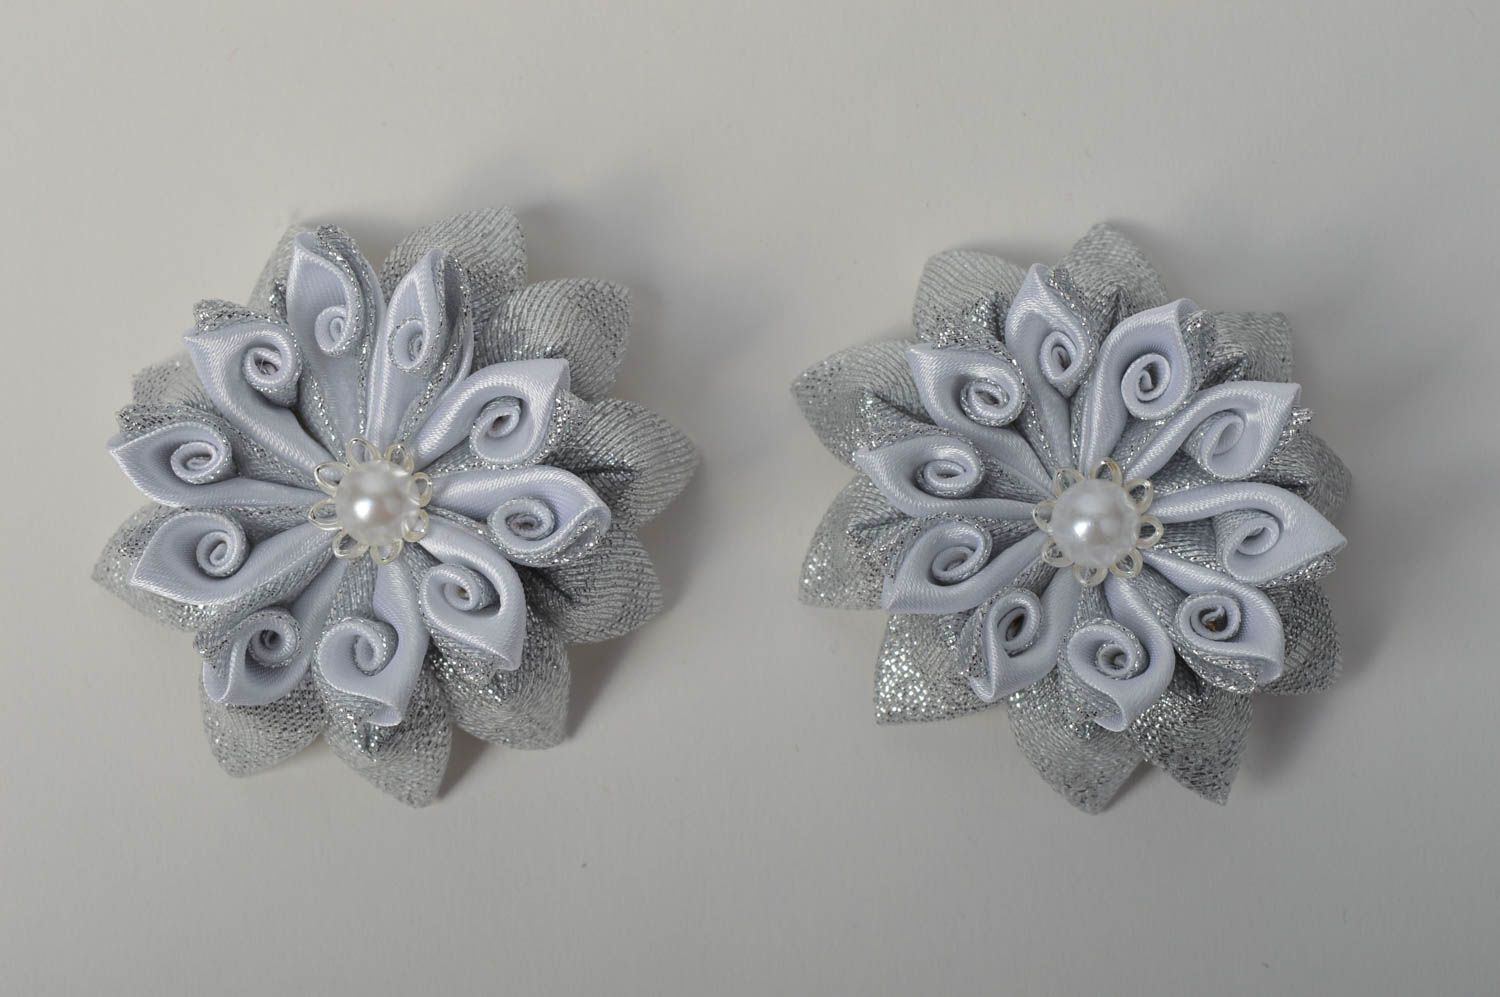 Unusual handmade textile barrette kanzashi flower 2 pieces gifts for her photo 1